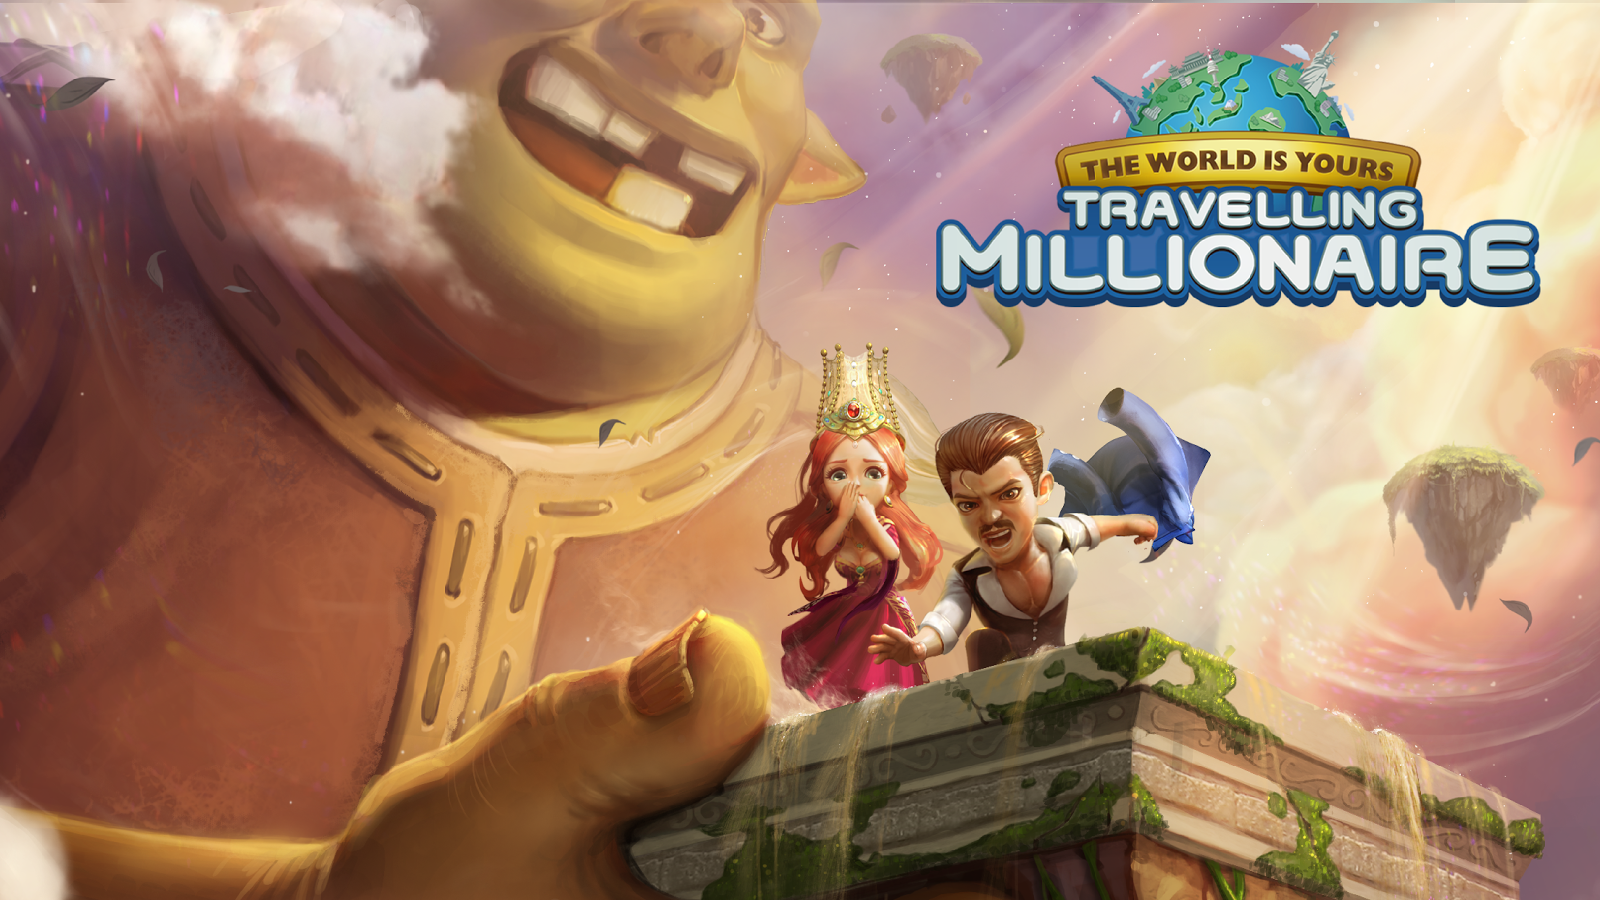 Image of Travelling Millionaire